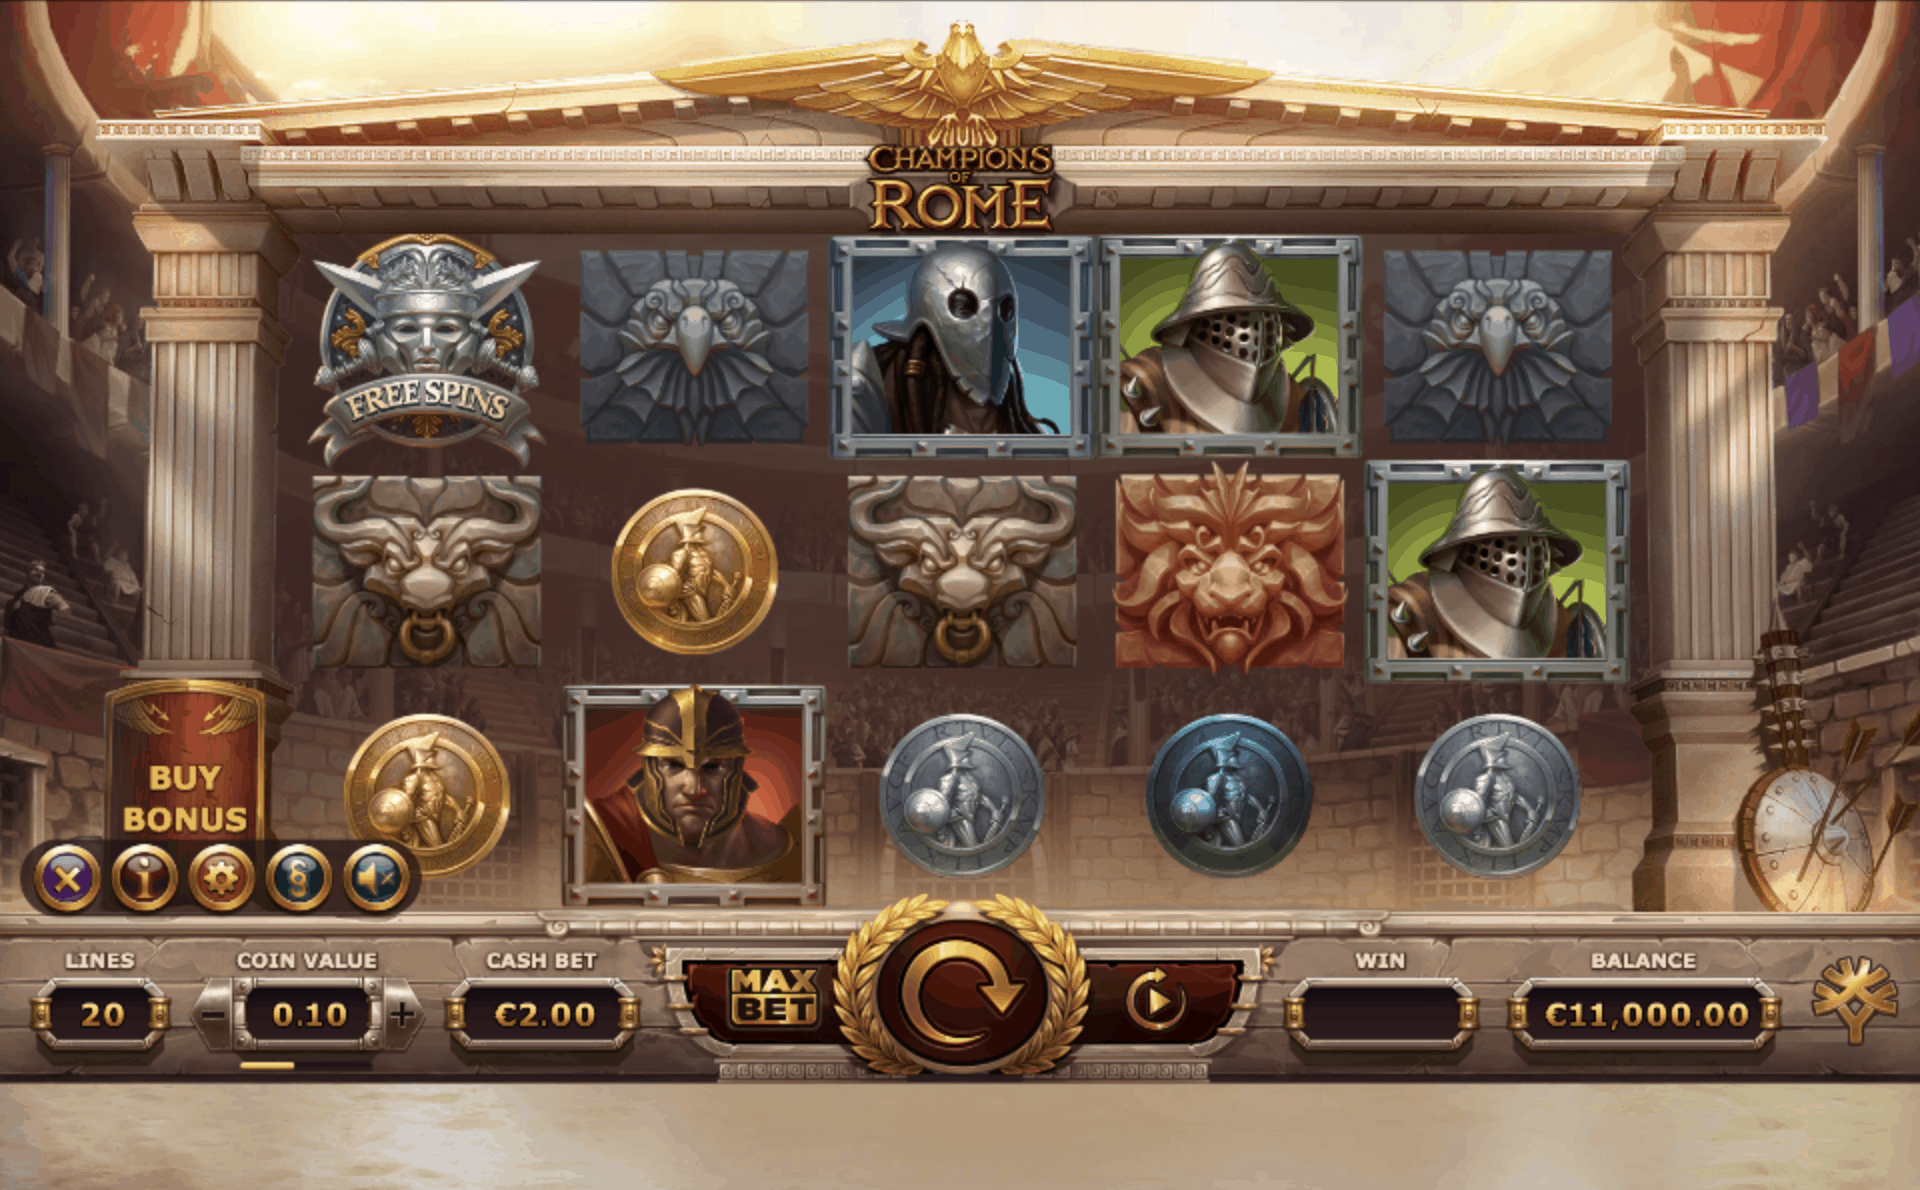 Champions of Rome Review